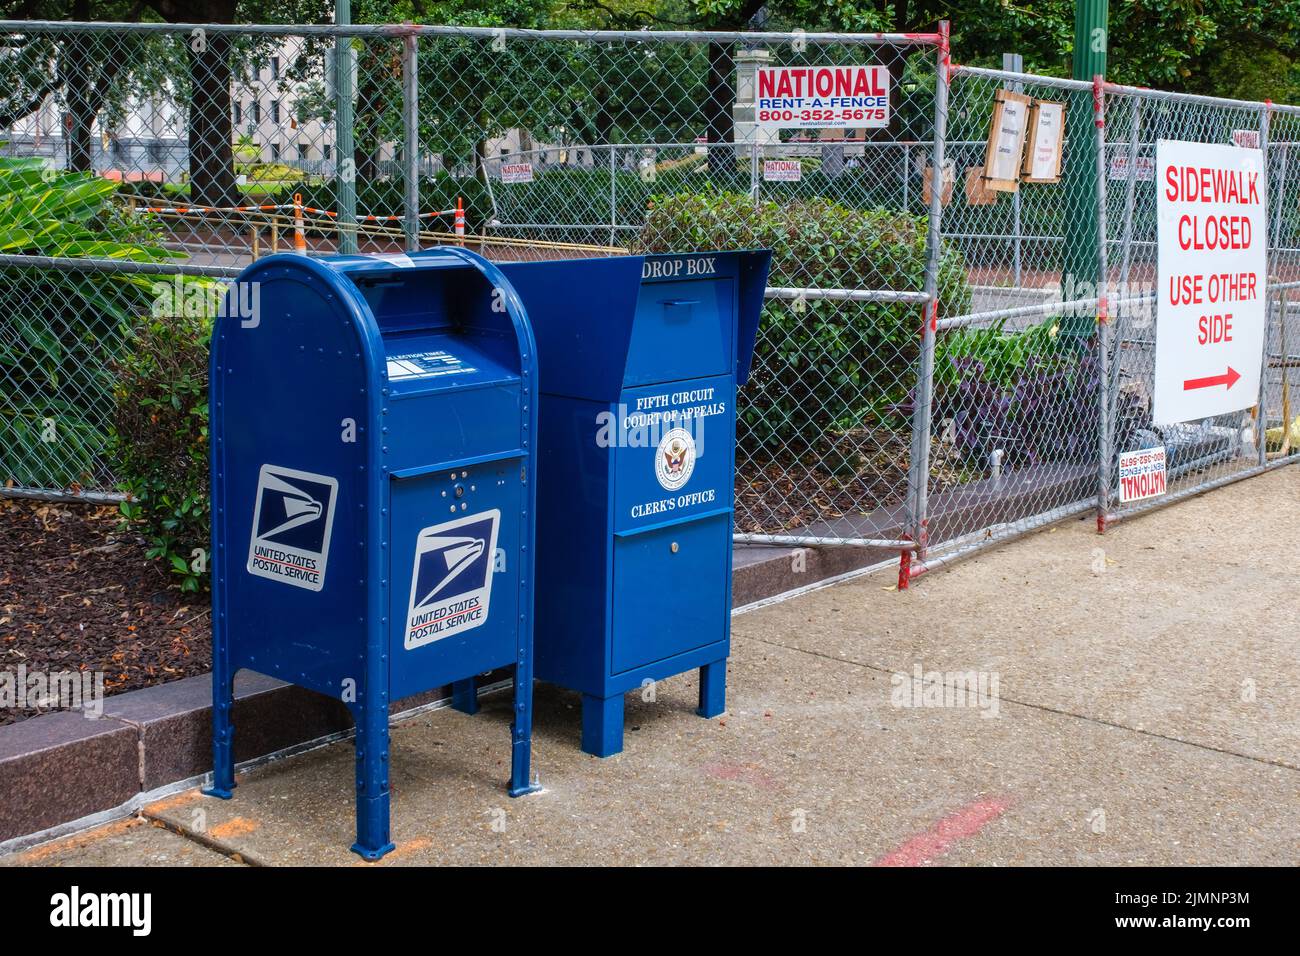 NEW ORLEANS, LA, USA - AUGUST 6, 2022: U.S. Postal Service and Fifth Circuit Court of Appeals drop boxes near Lafayette Square in downtown New Orleans Stock Photo